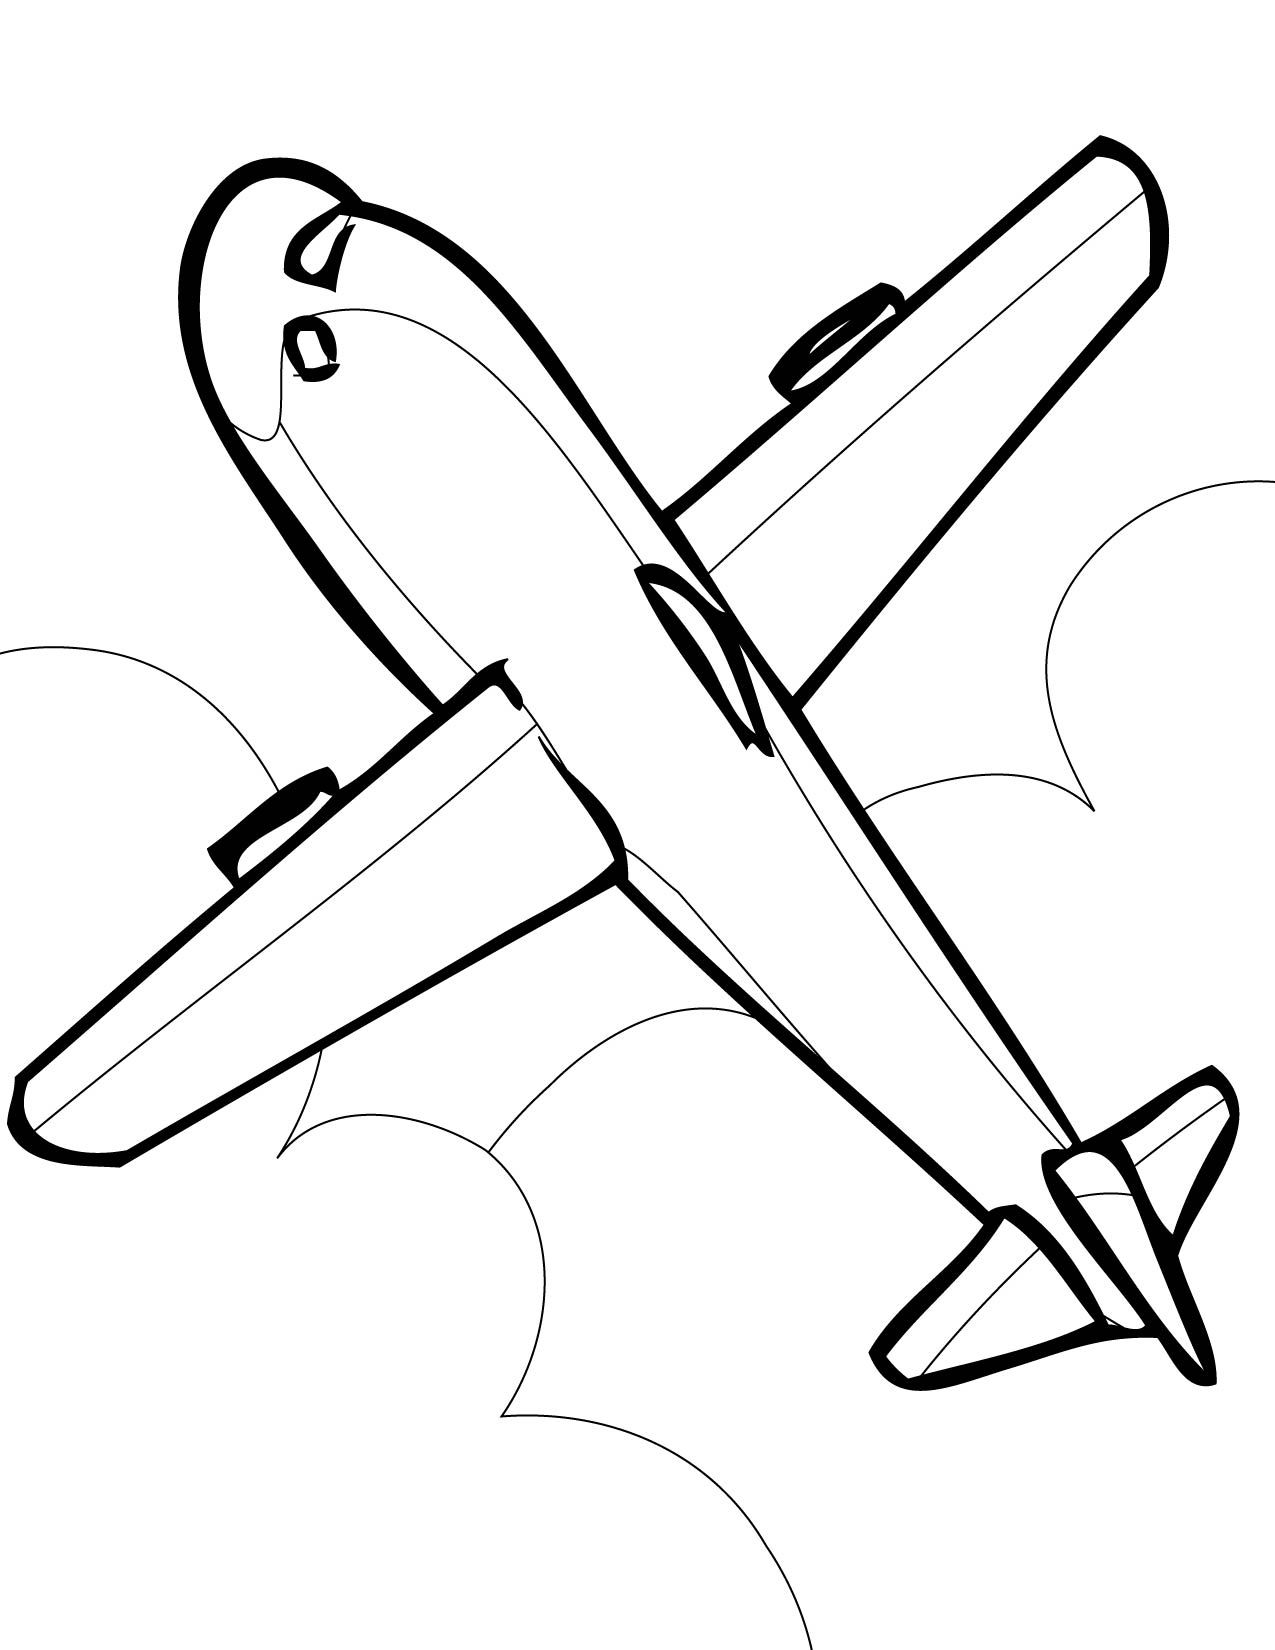 Airplane Coloring Page - Handipoints